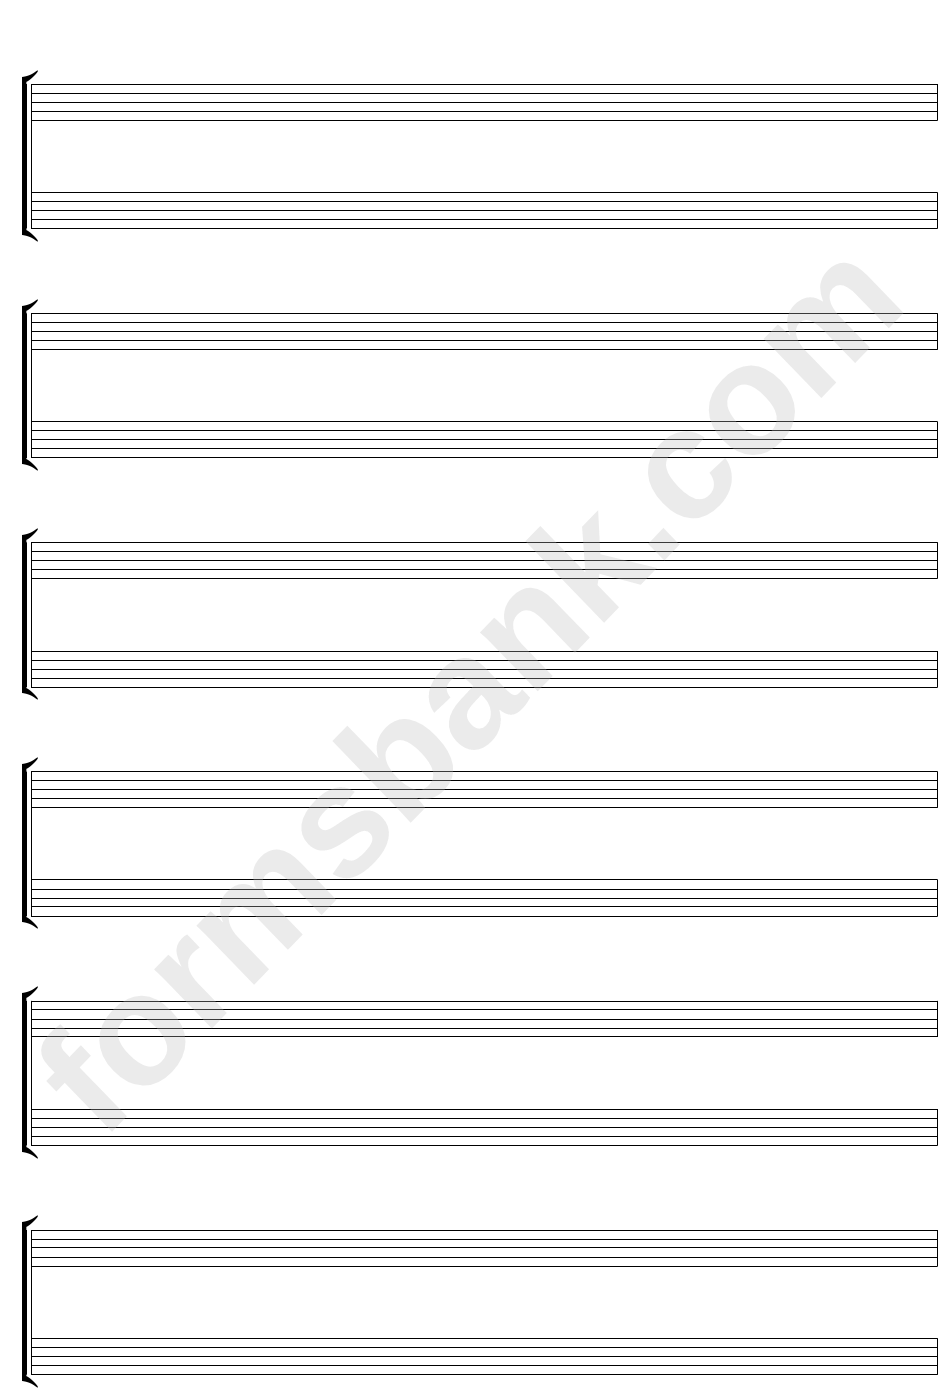 6-Stave, Duo Format, Blank Clefs (A4 Portrait) Blank Sheet Music